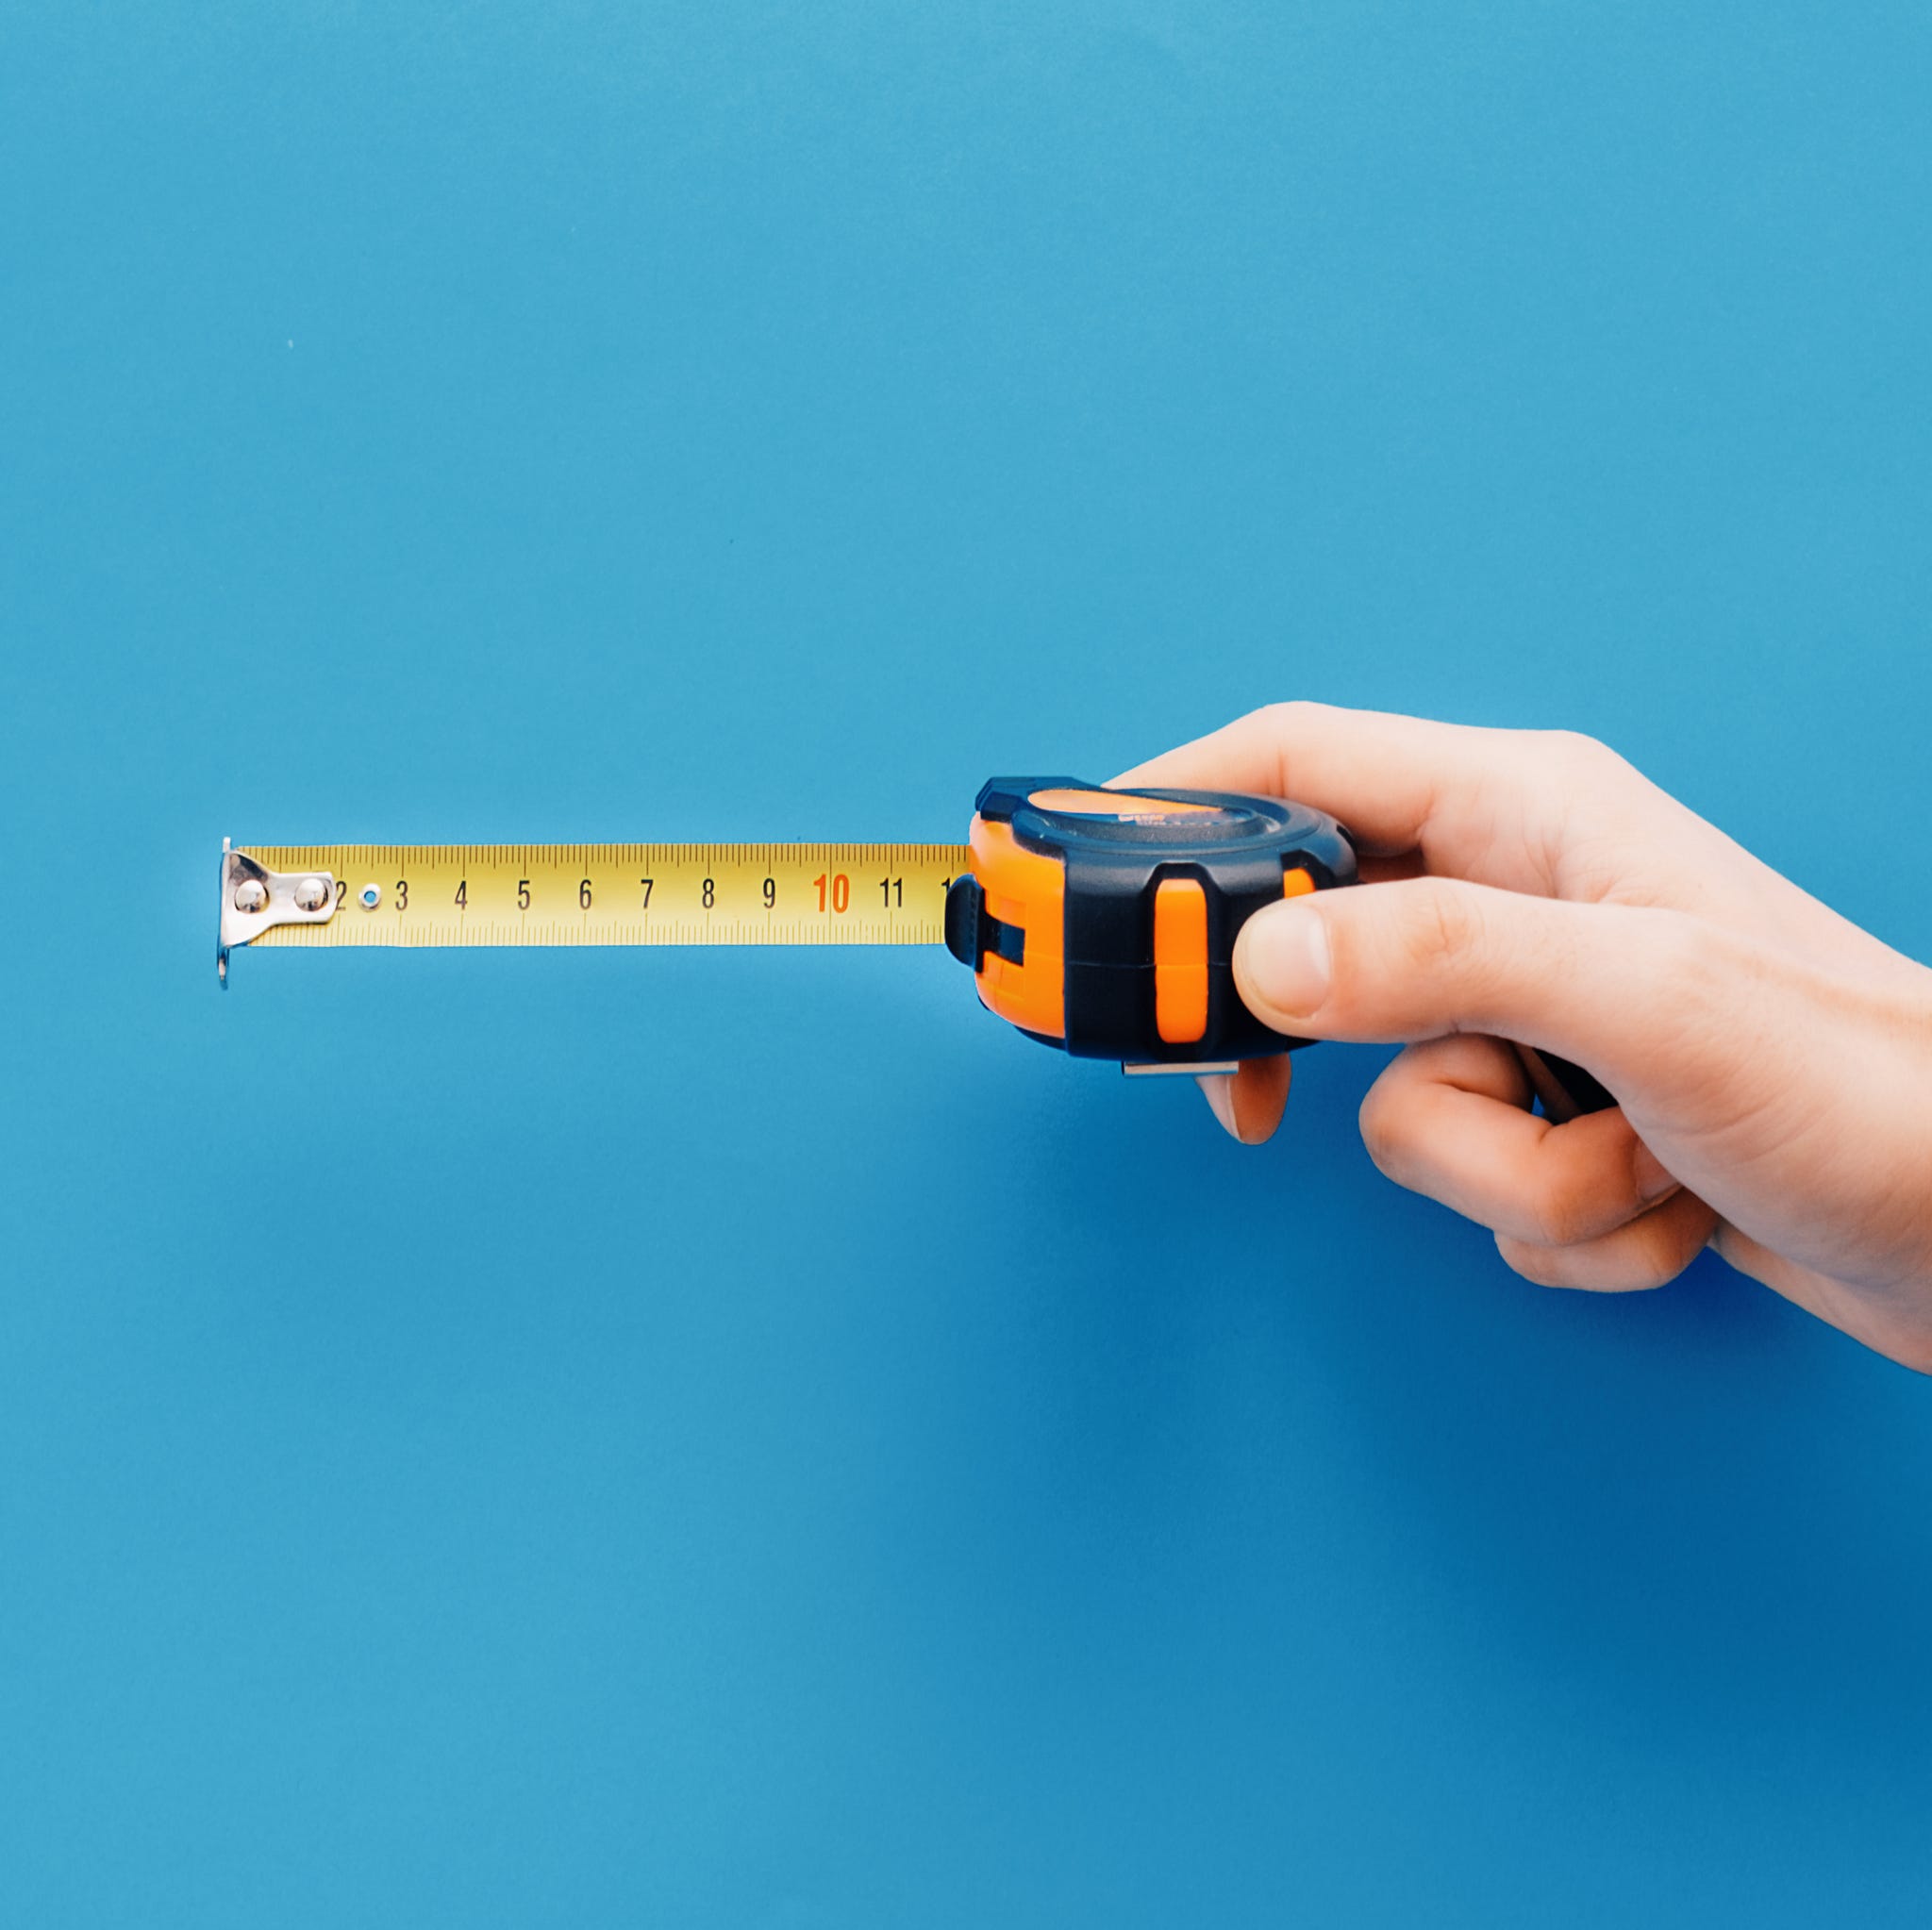 Bricolage concept.Hand holding tape measure on blue background